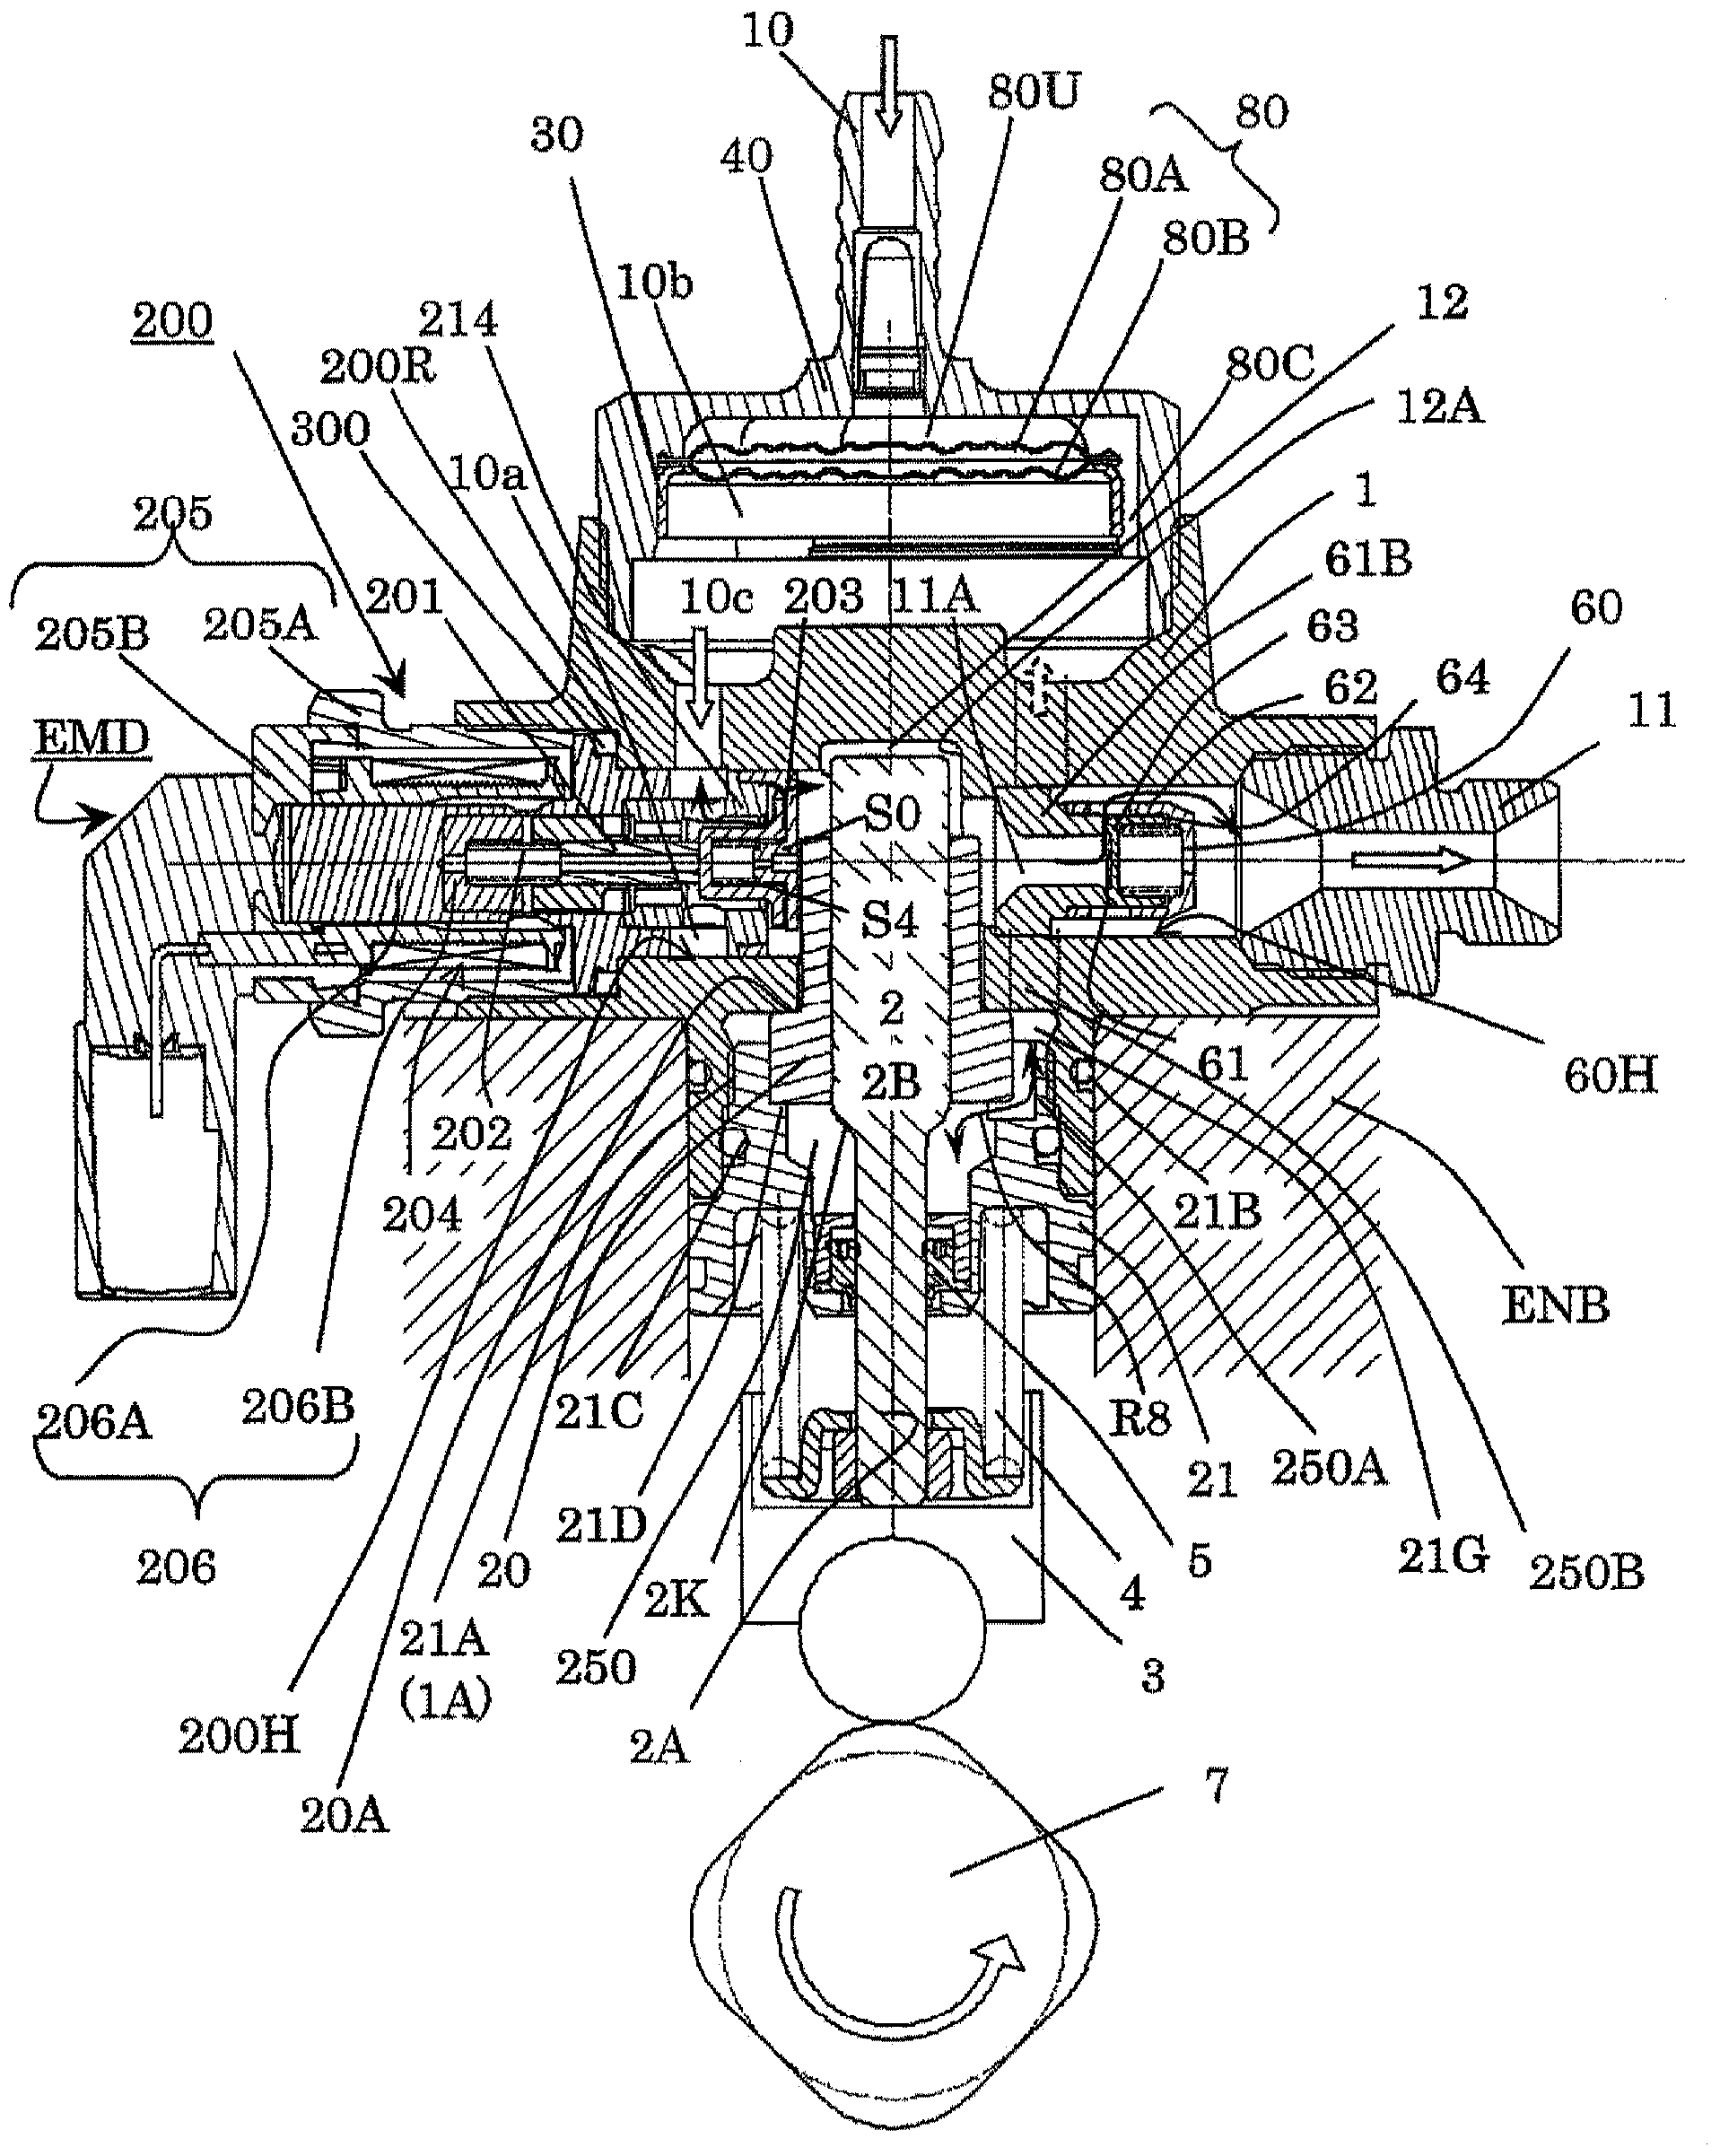 High-pressure fuel supply pump equipped with electromagnetically driven inlet valve